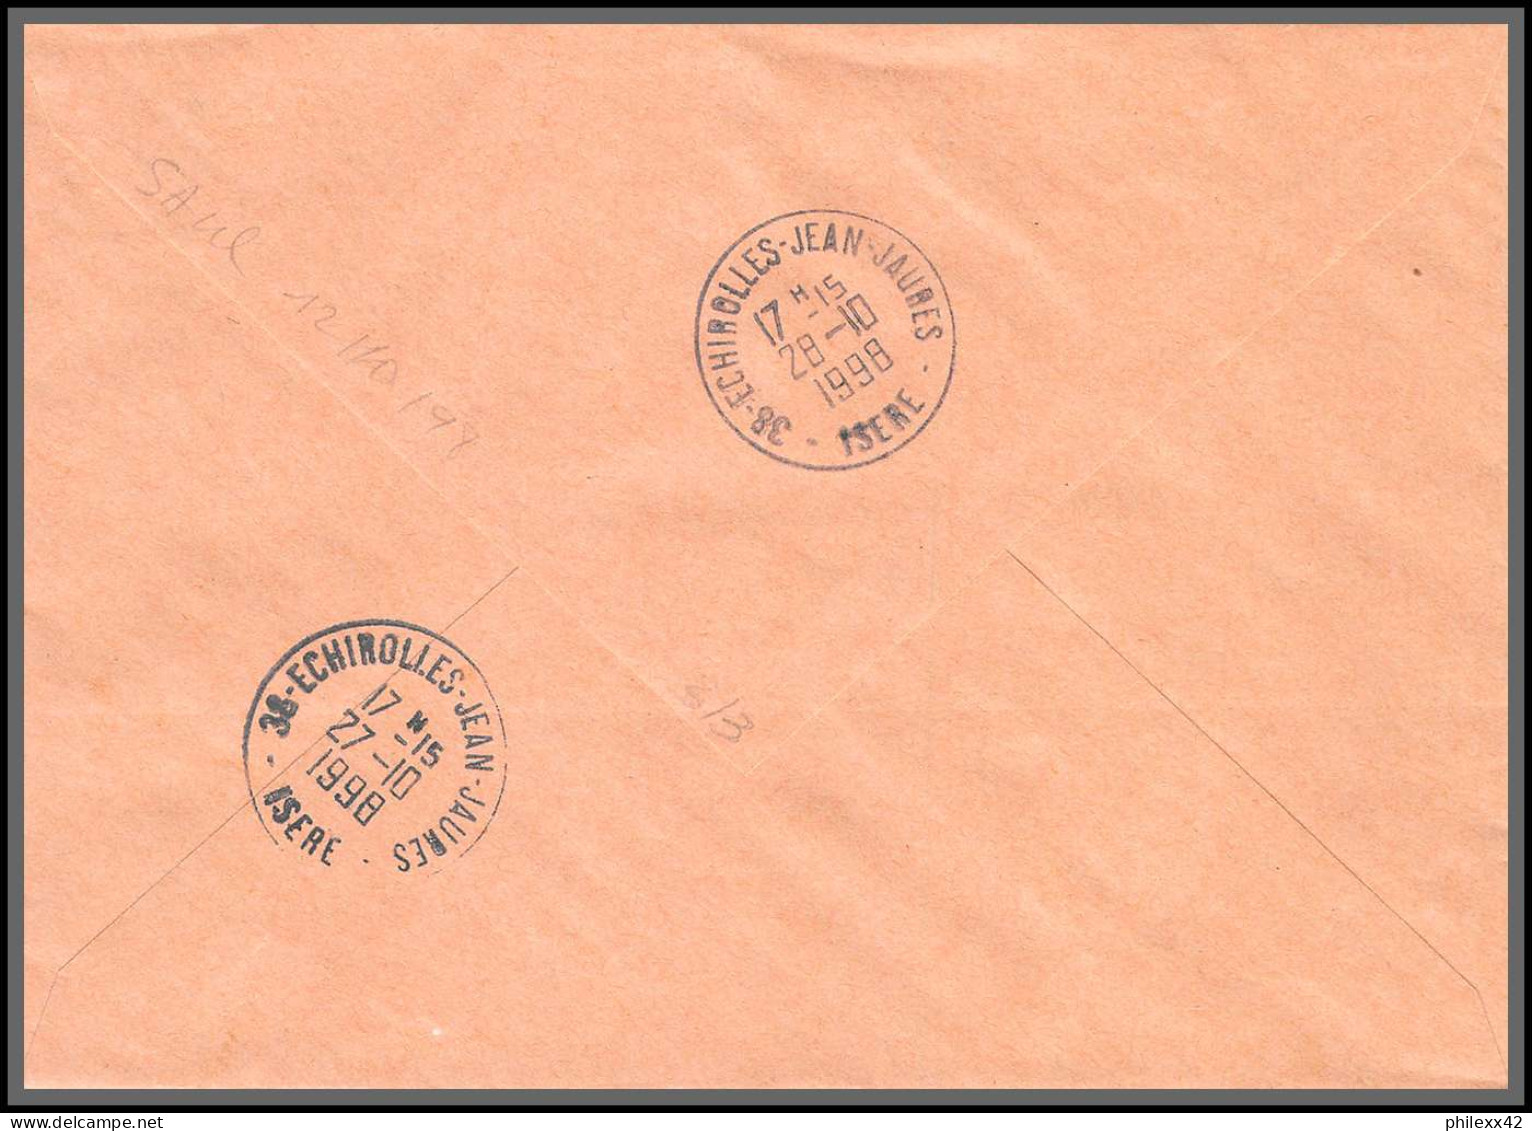 74506 Mixte Briat Luquet Mayotte St Pierre 1998 Saul Guyane Echirolles Isère Lettre Cover Colonies - 1997-2004 Marianne Of July 14th